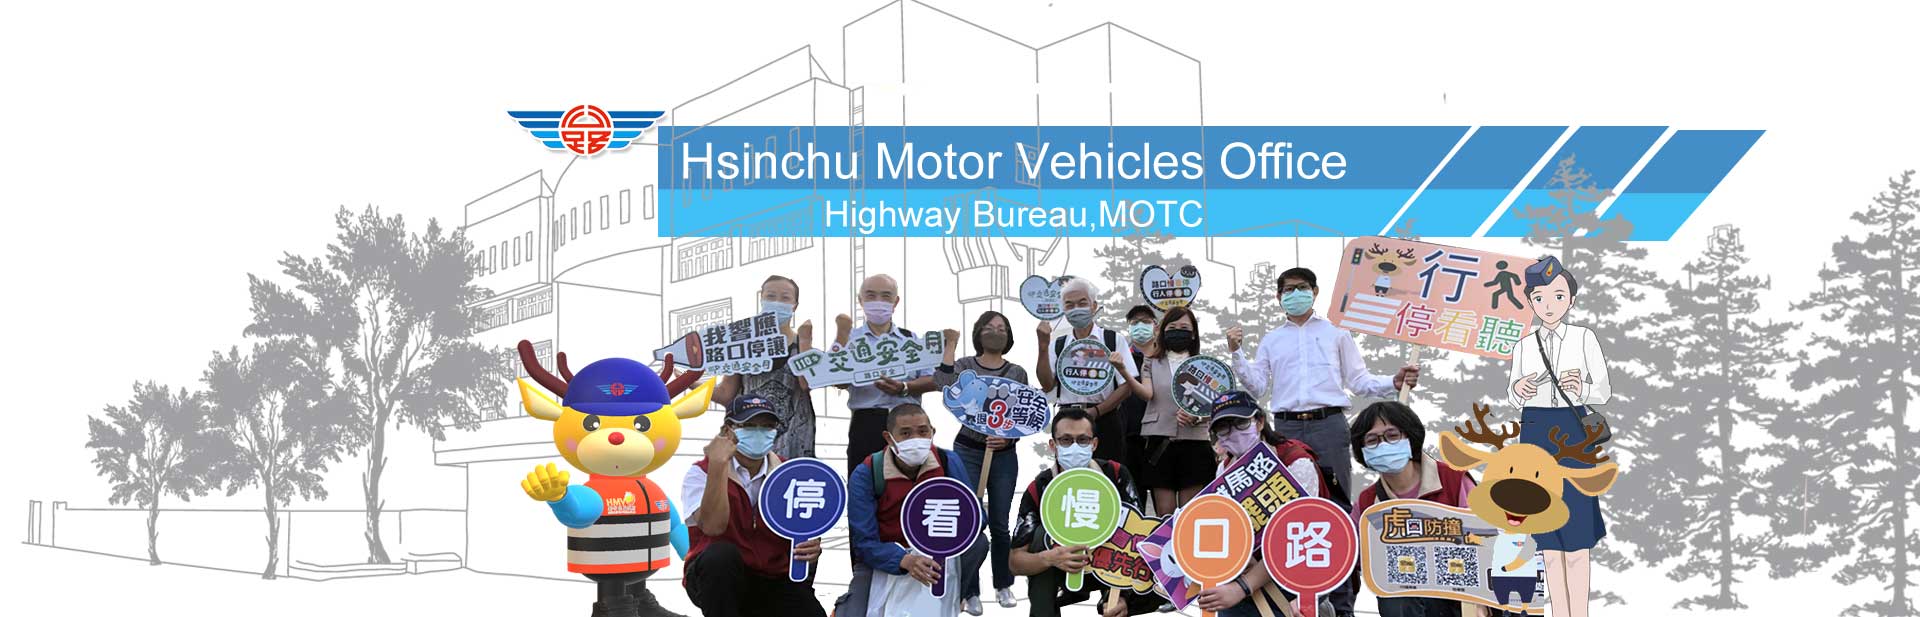 Welcome to Hsinchu Motor Vehicles Office